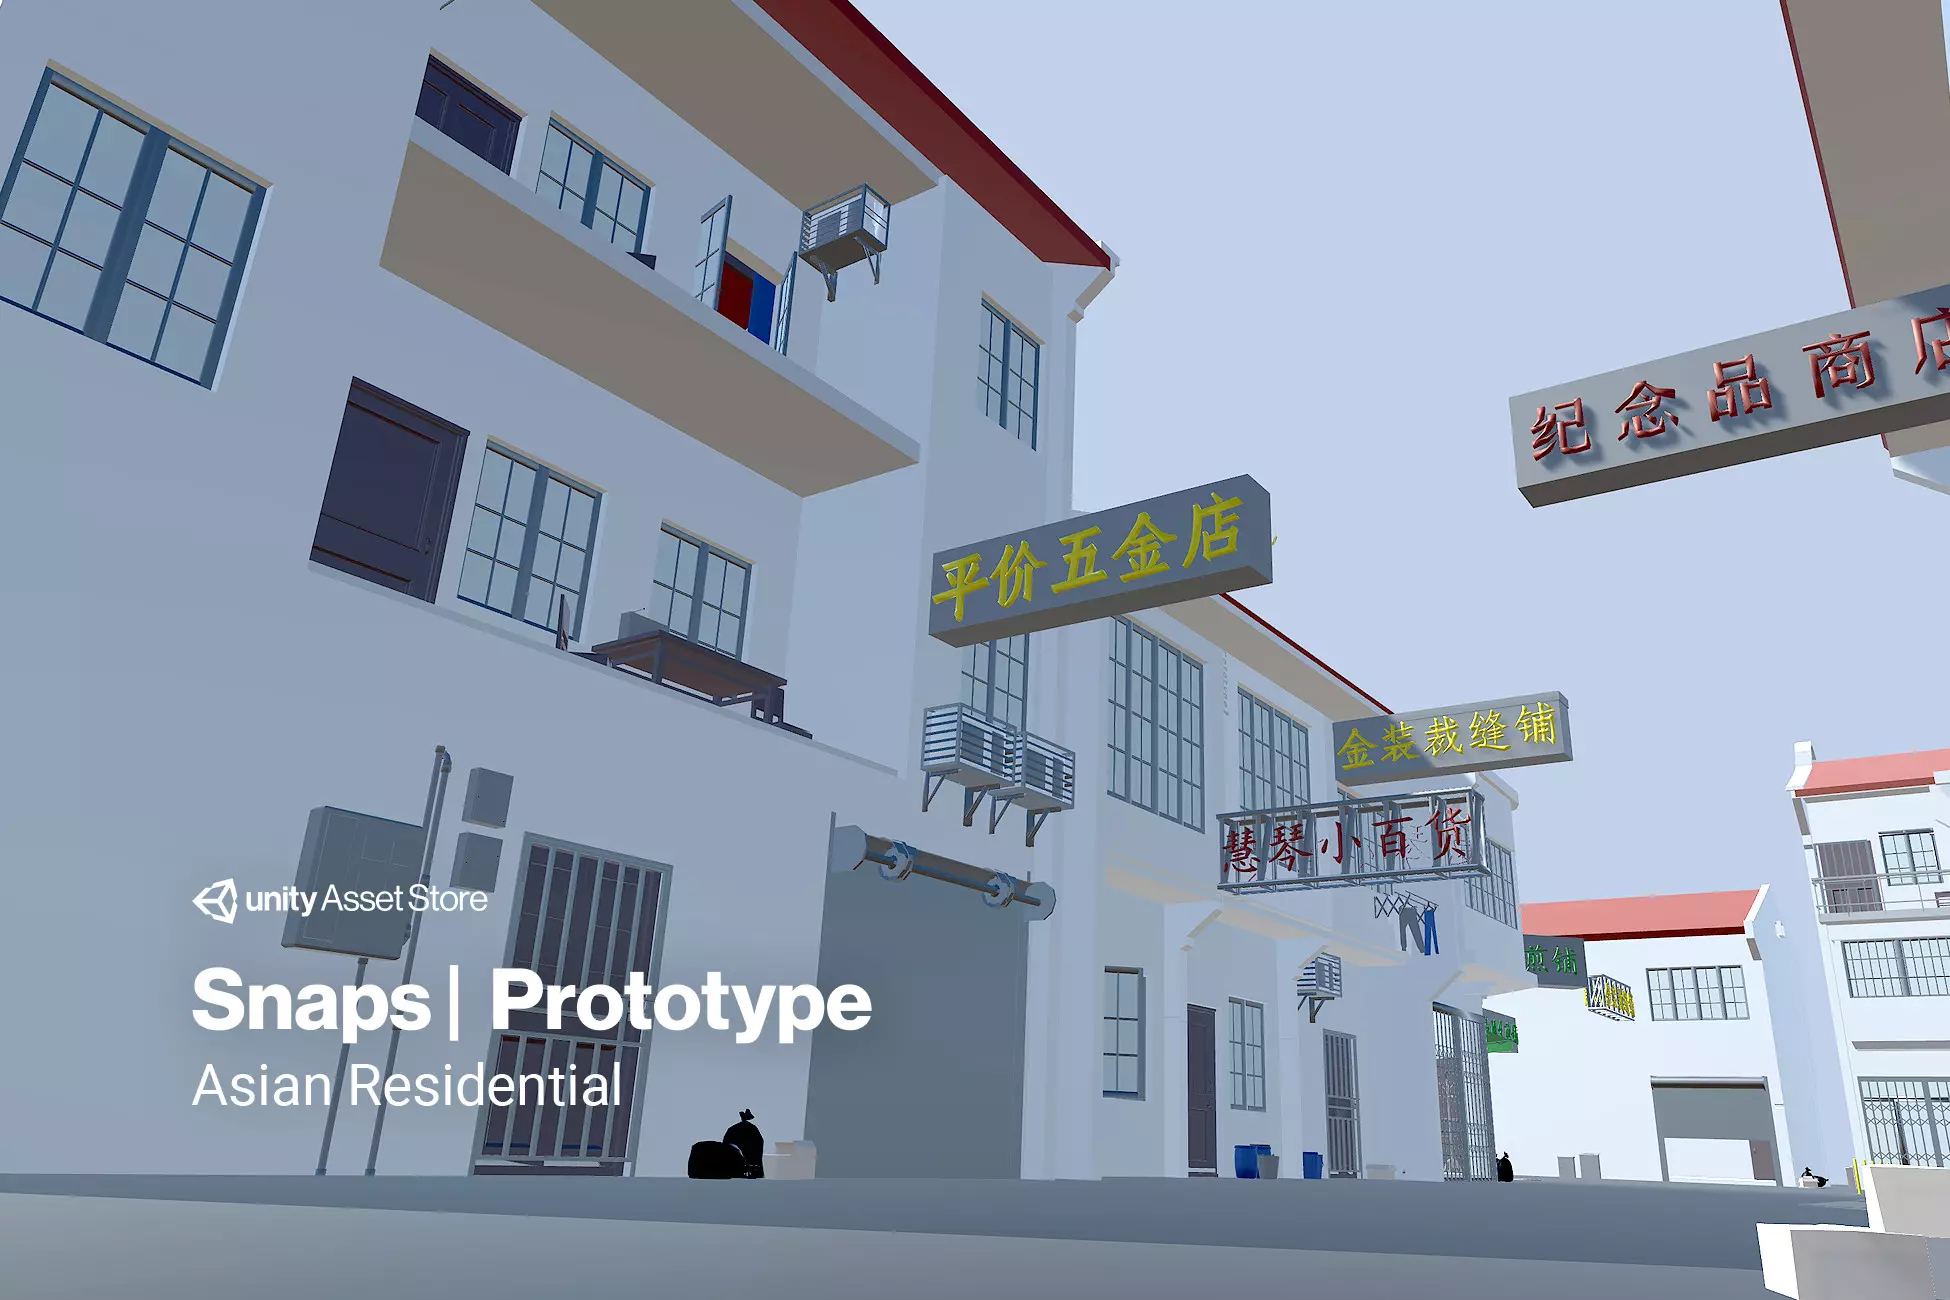 Unity Asset Snaps Prototype Asian Residential free download